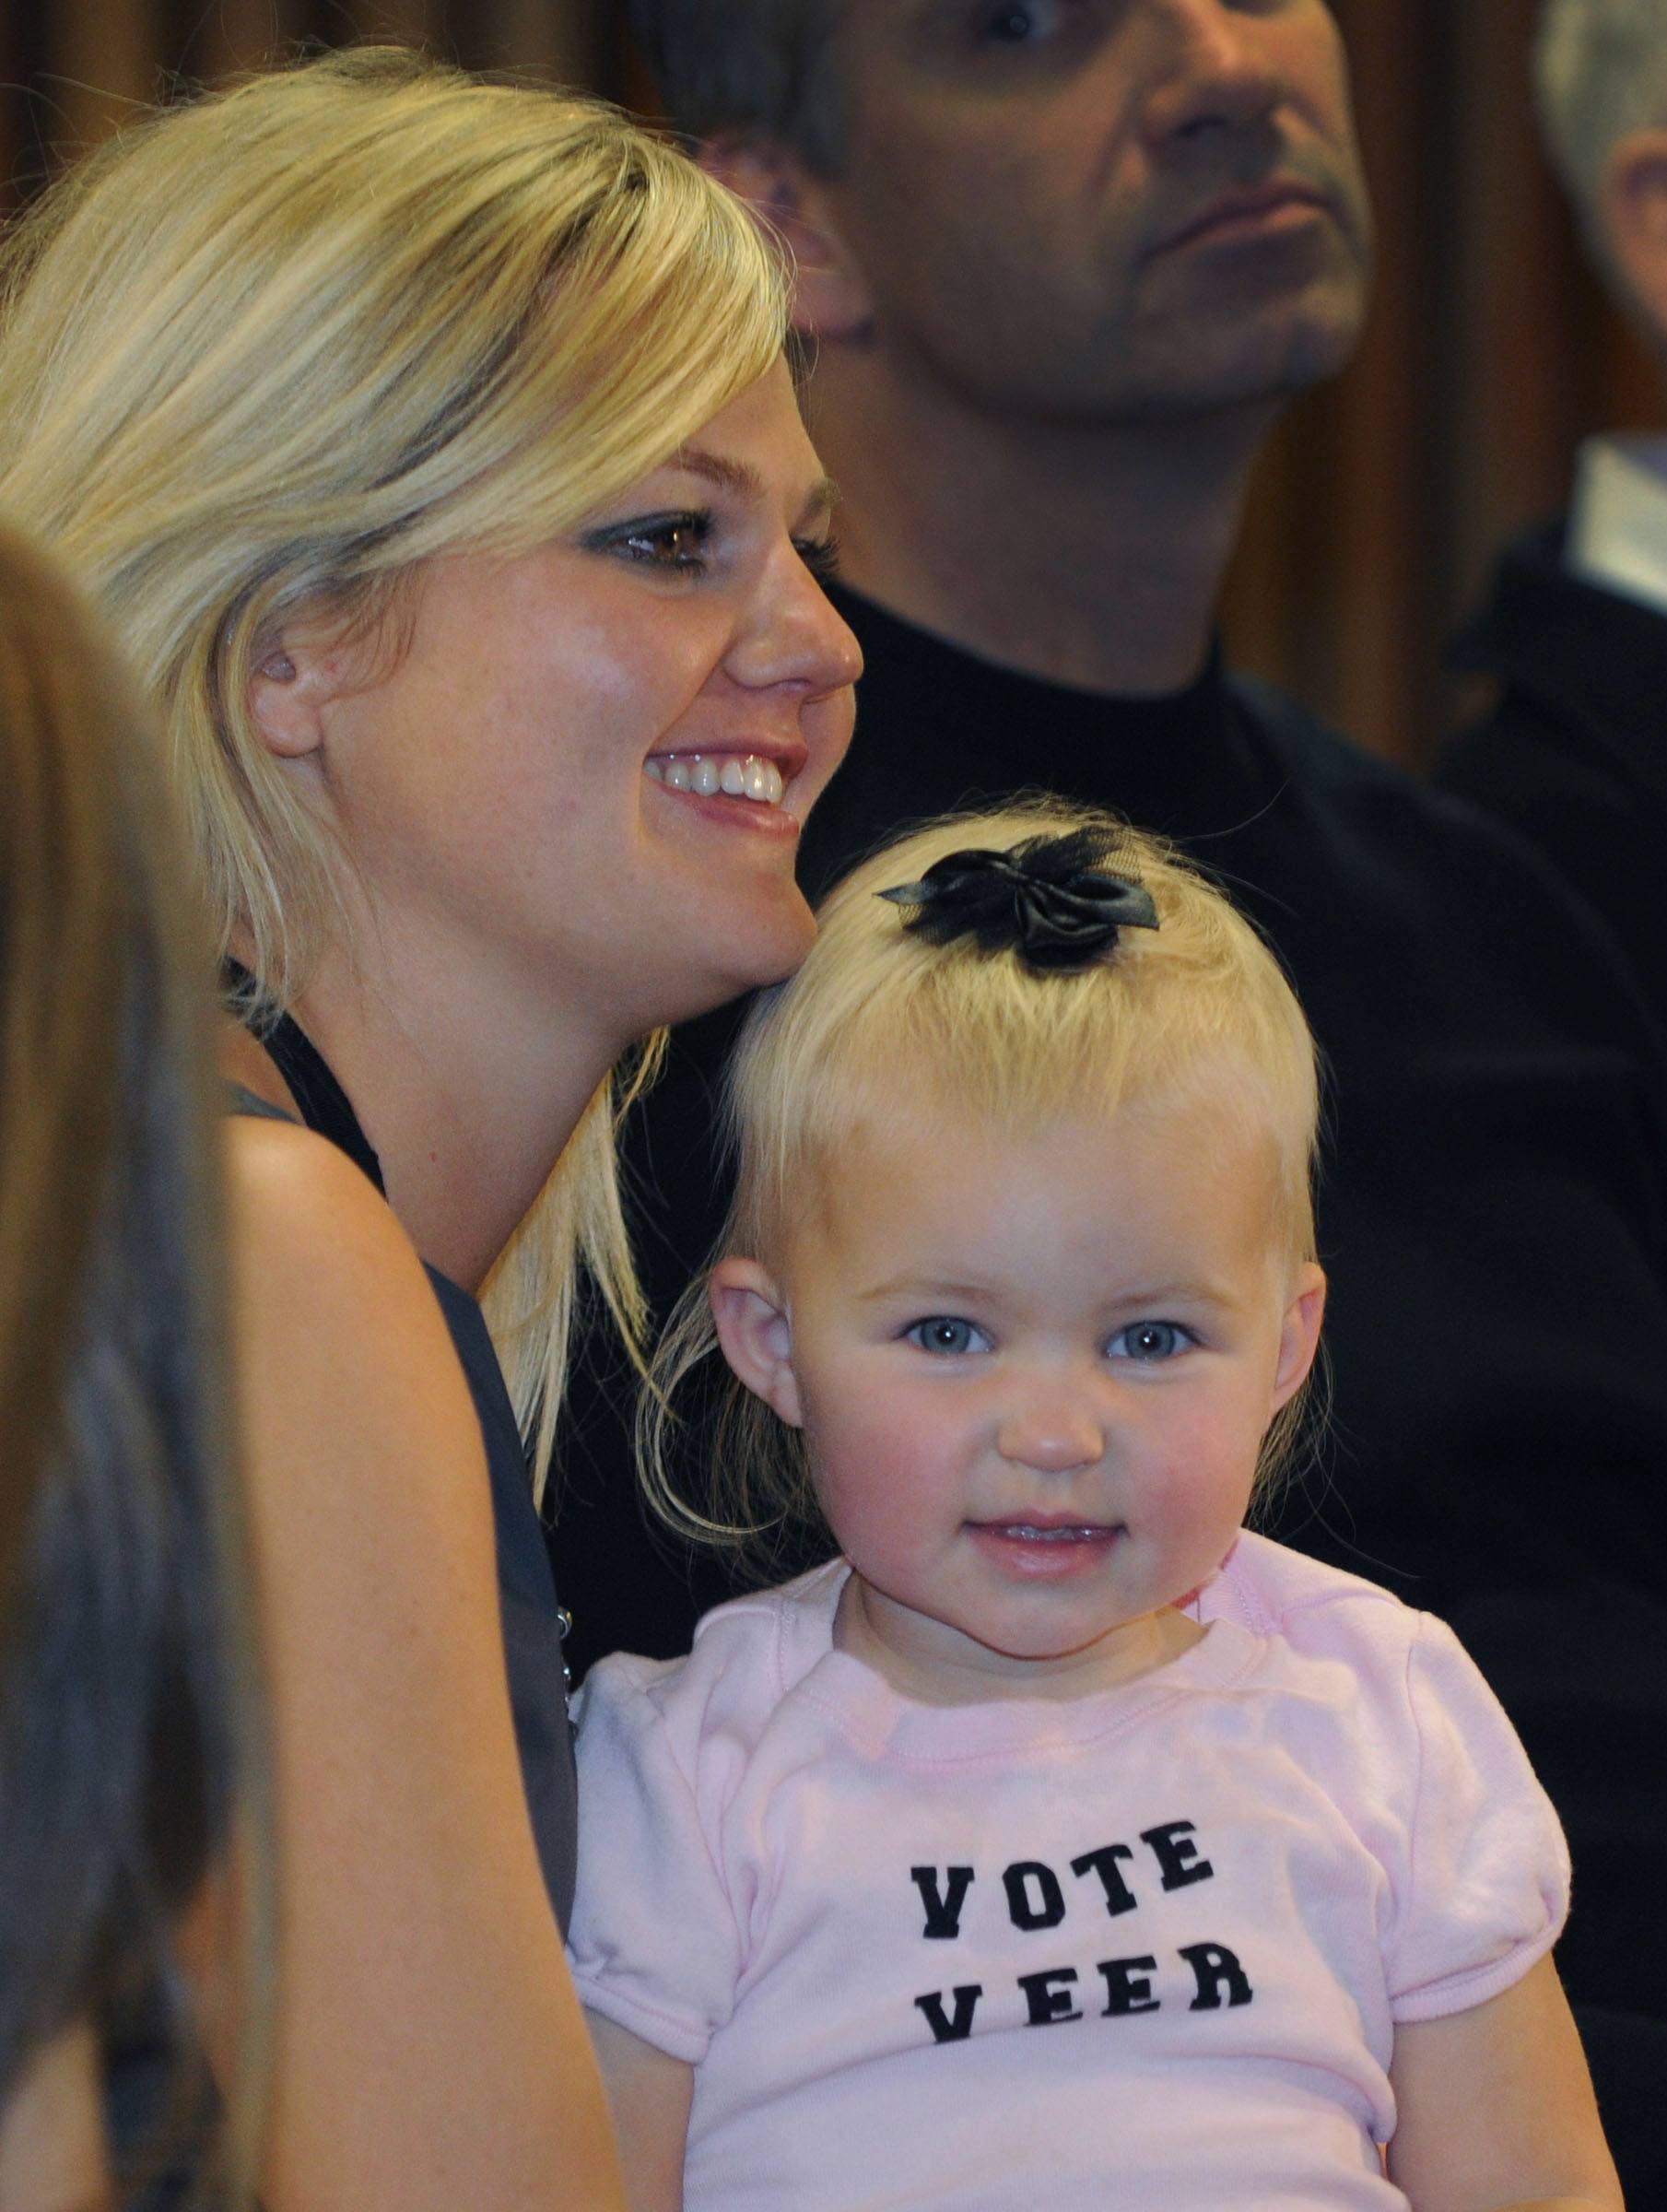 TOP SUPPORTER-One-year-old Olivia Gulbransen sports a 'Vote Veer' t-shirt while hanging out with her aunt Tara Veer during the election Monday night. Veer received 10